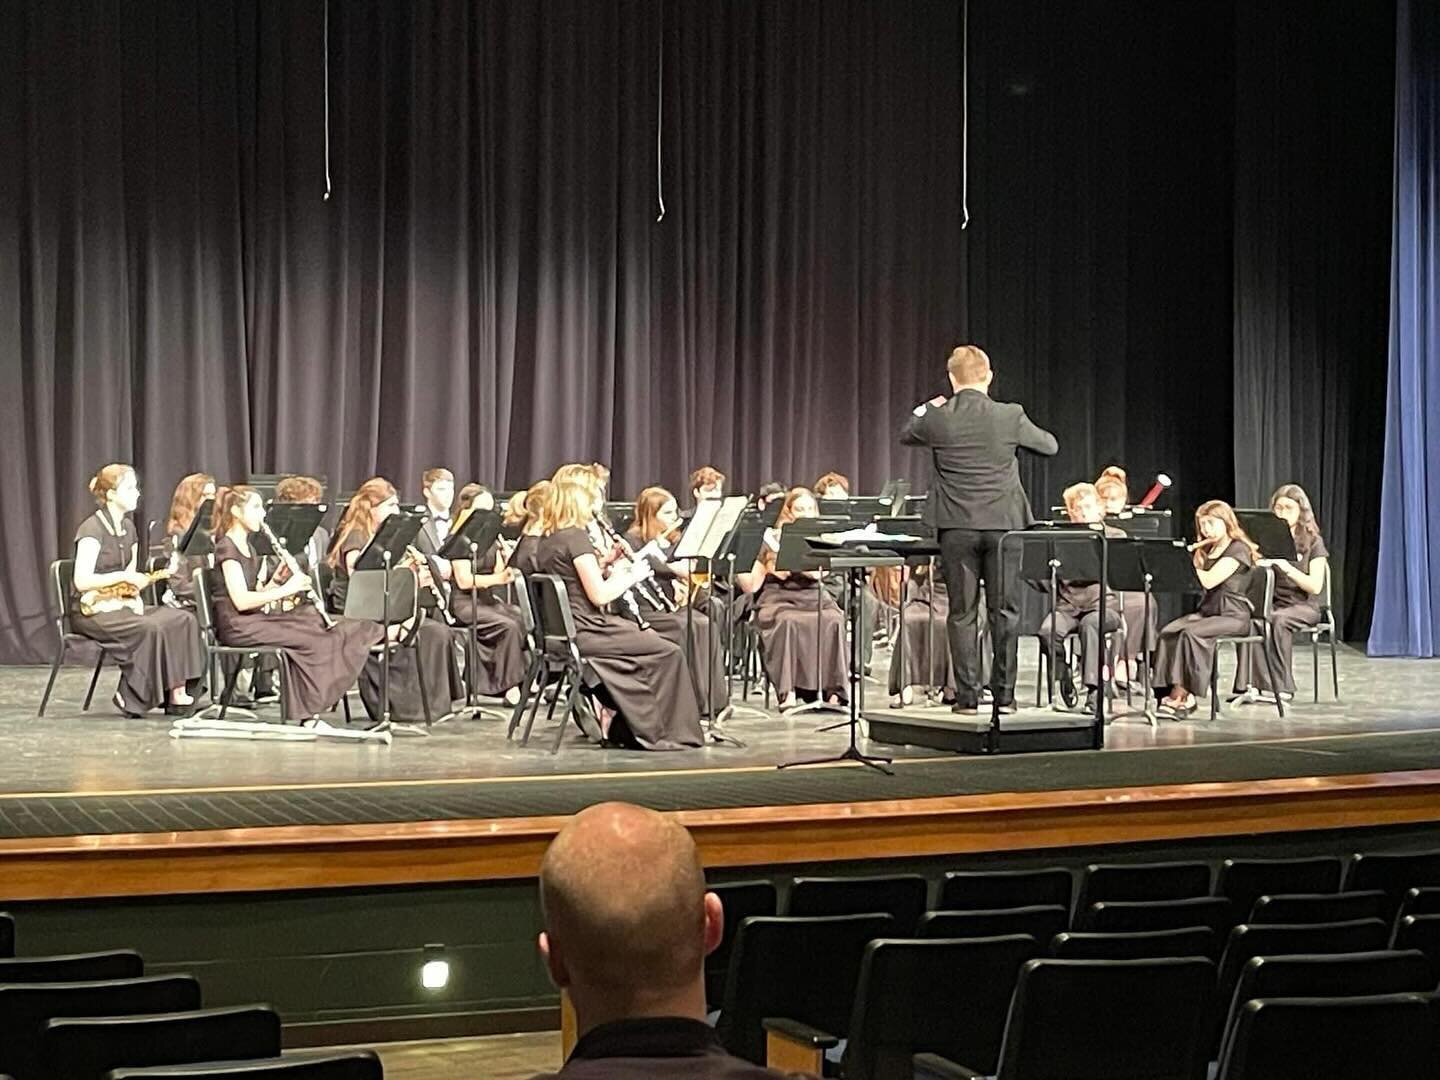 From Mr. Sullivan:
Way to go Rock Bridge Bands! MSHSAA Large Ensemble Festival was today and all of our ensembles played extremely well. We tell our students it isn&rsquo;t about the rating, it&rsquo;s about the process, and it&rsquo;s about getting 